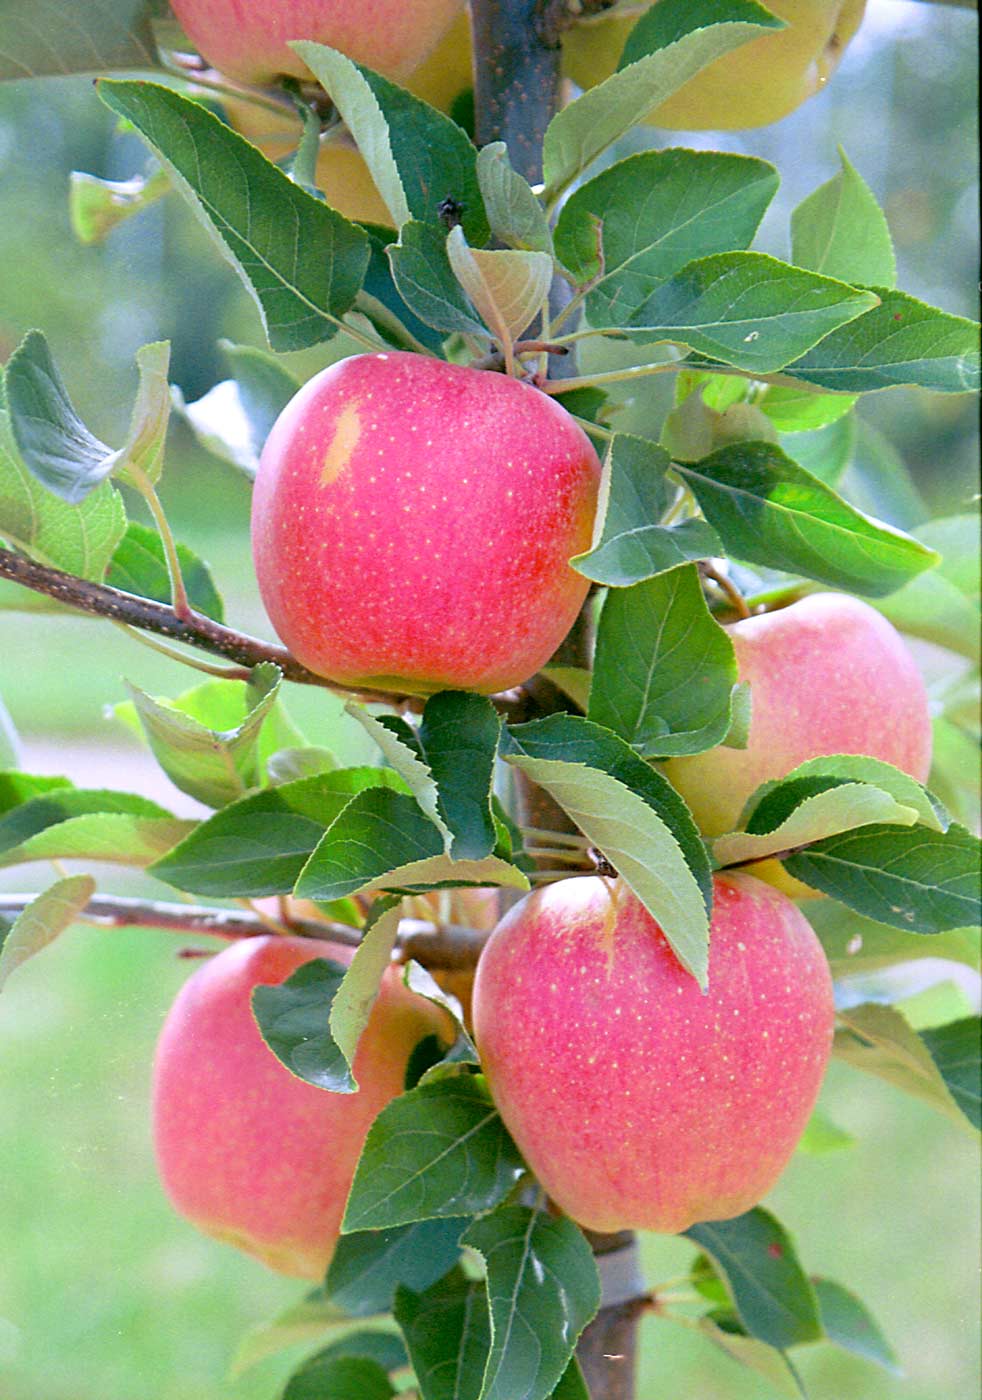 Firecracker, a new release from the Cornell AgriTech apple breeding program, has a unique combination of acidity and sweetness that makes it a good candidate for fresh use, baking and hard cider production. (Courtesy Kevin Maloney/Cornell University)